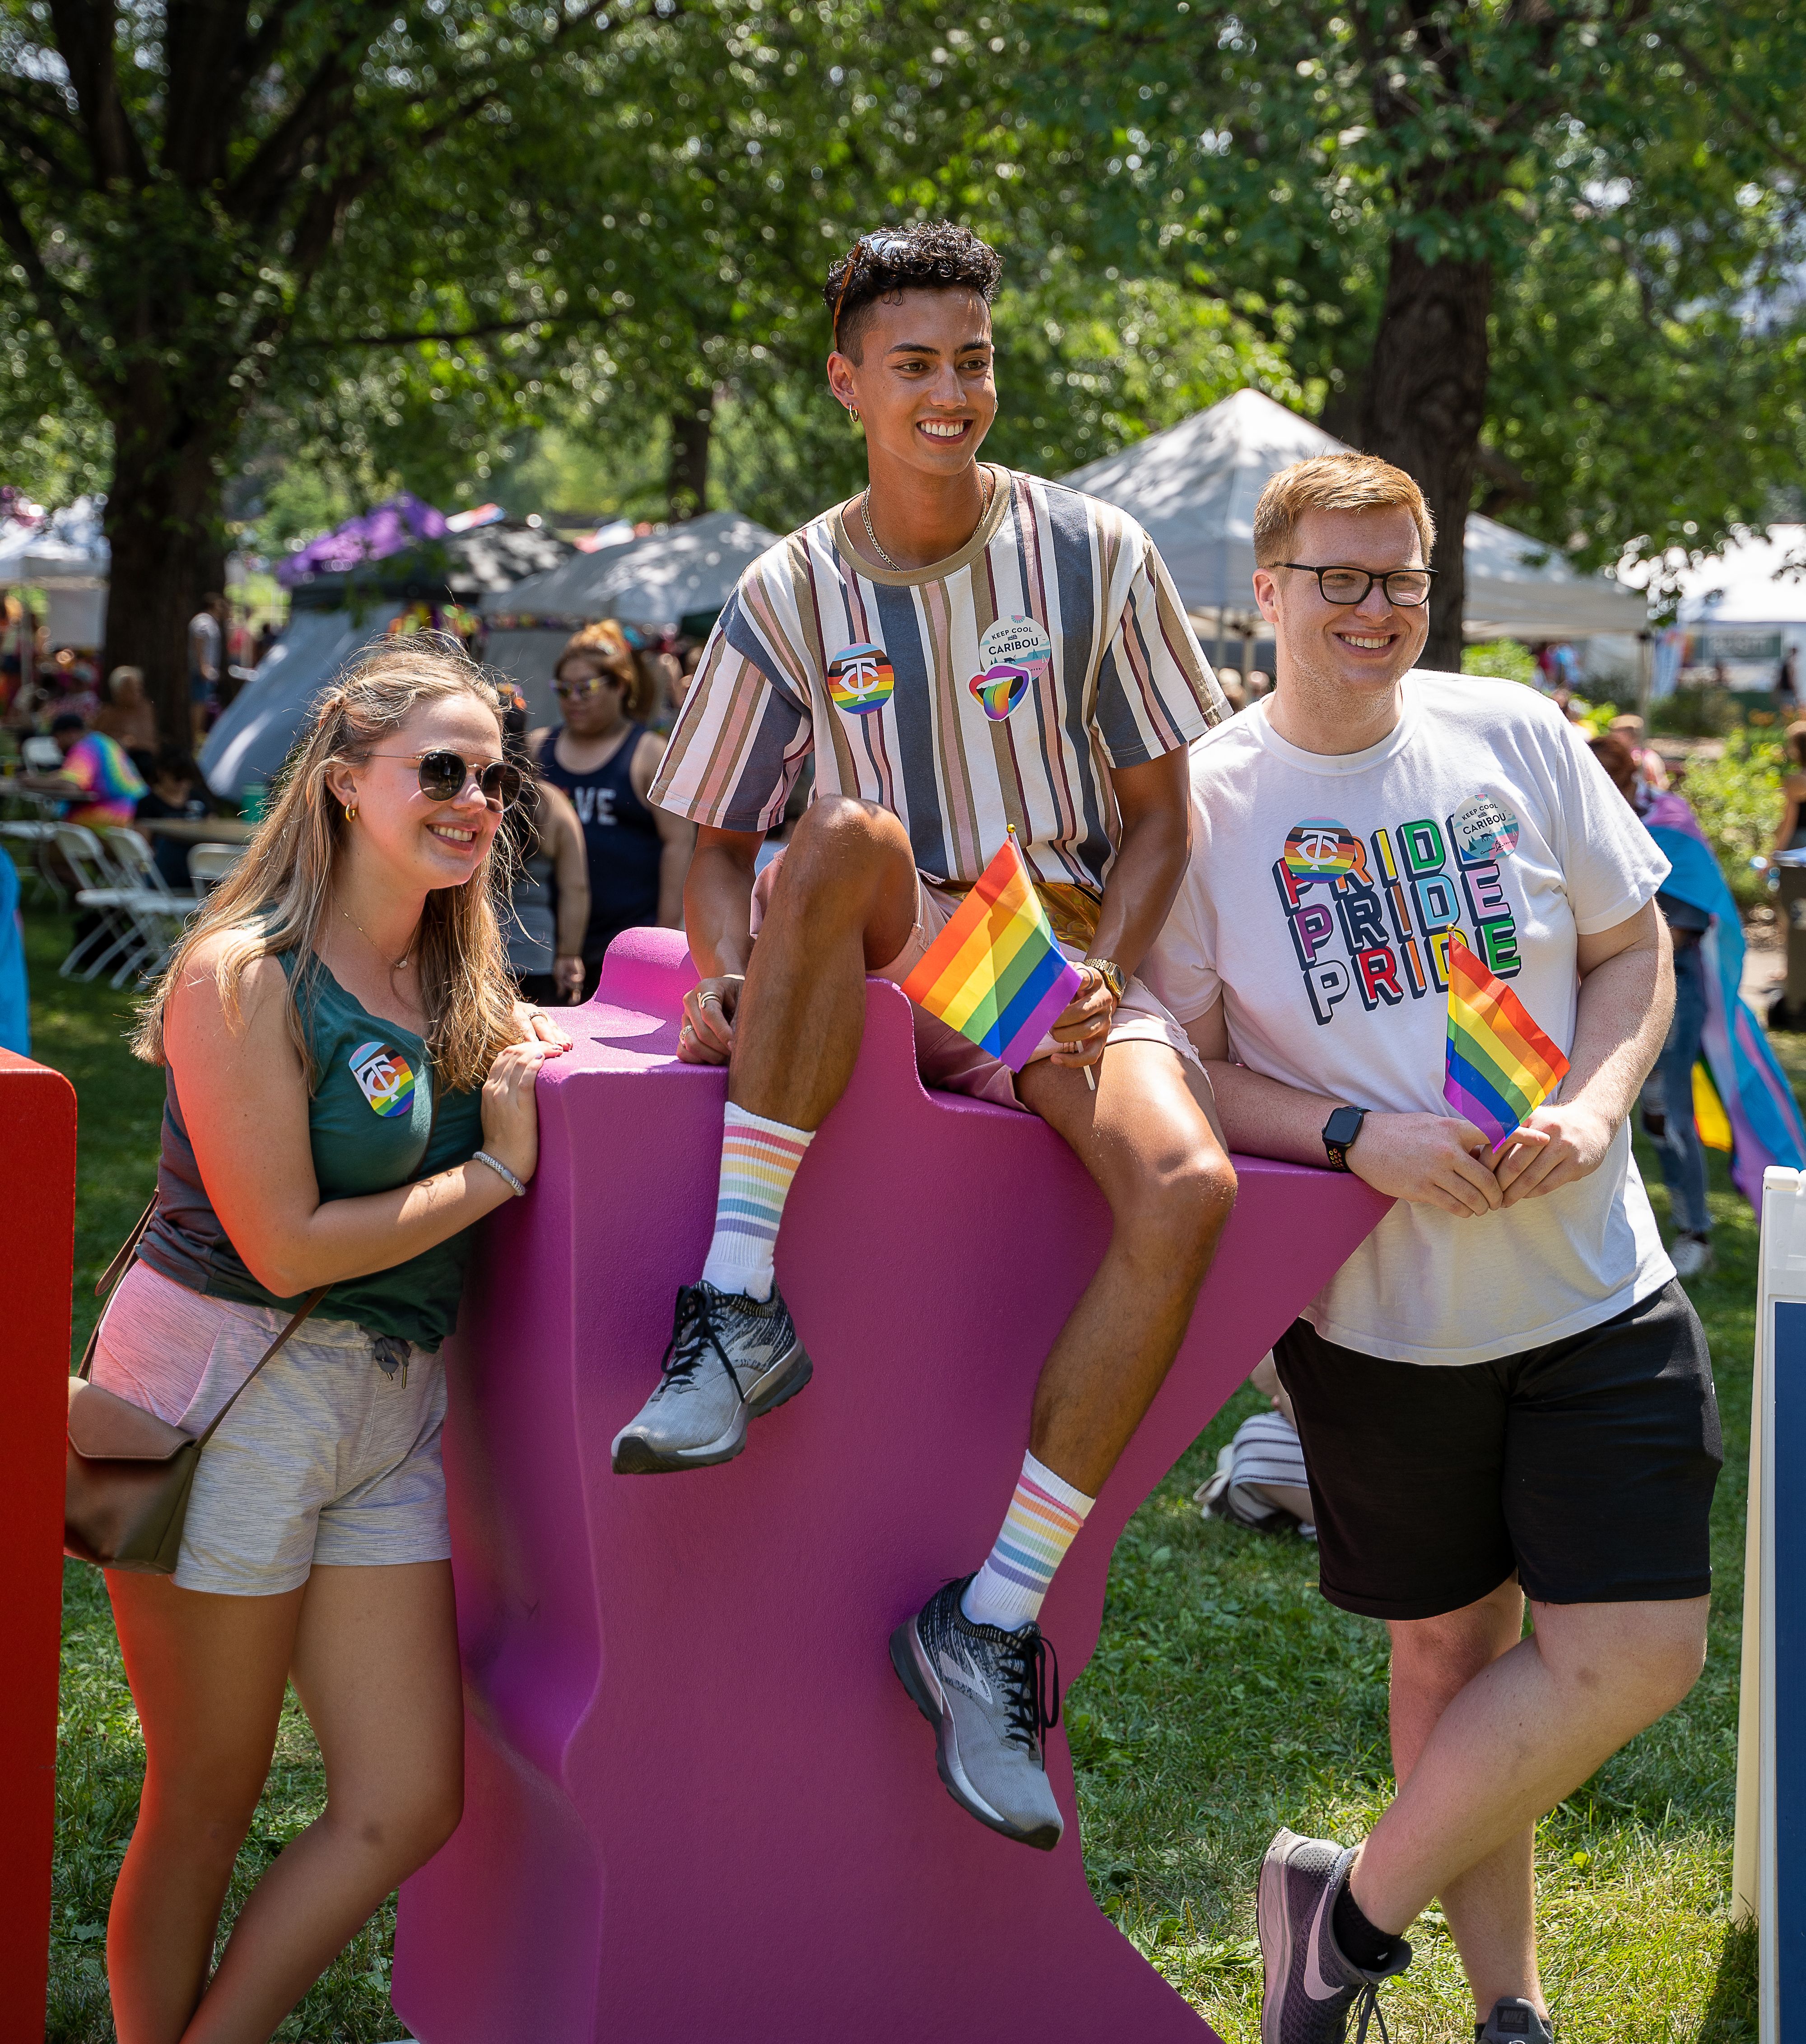 Three people posing for a photo with rainbow flags at a pride event